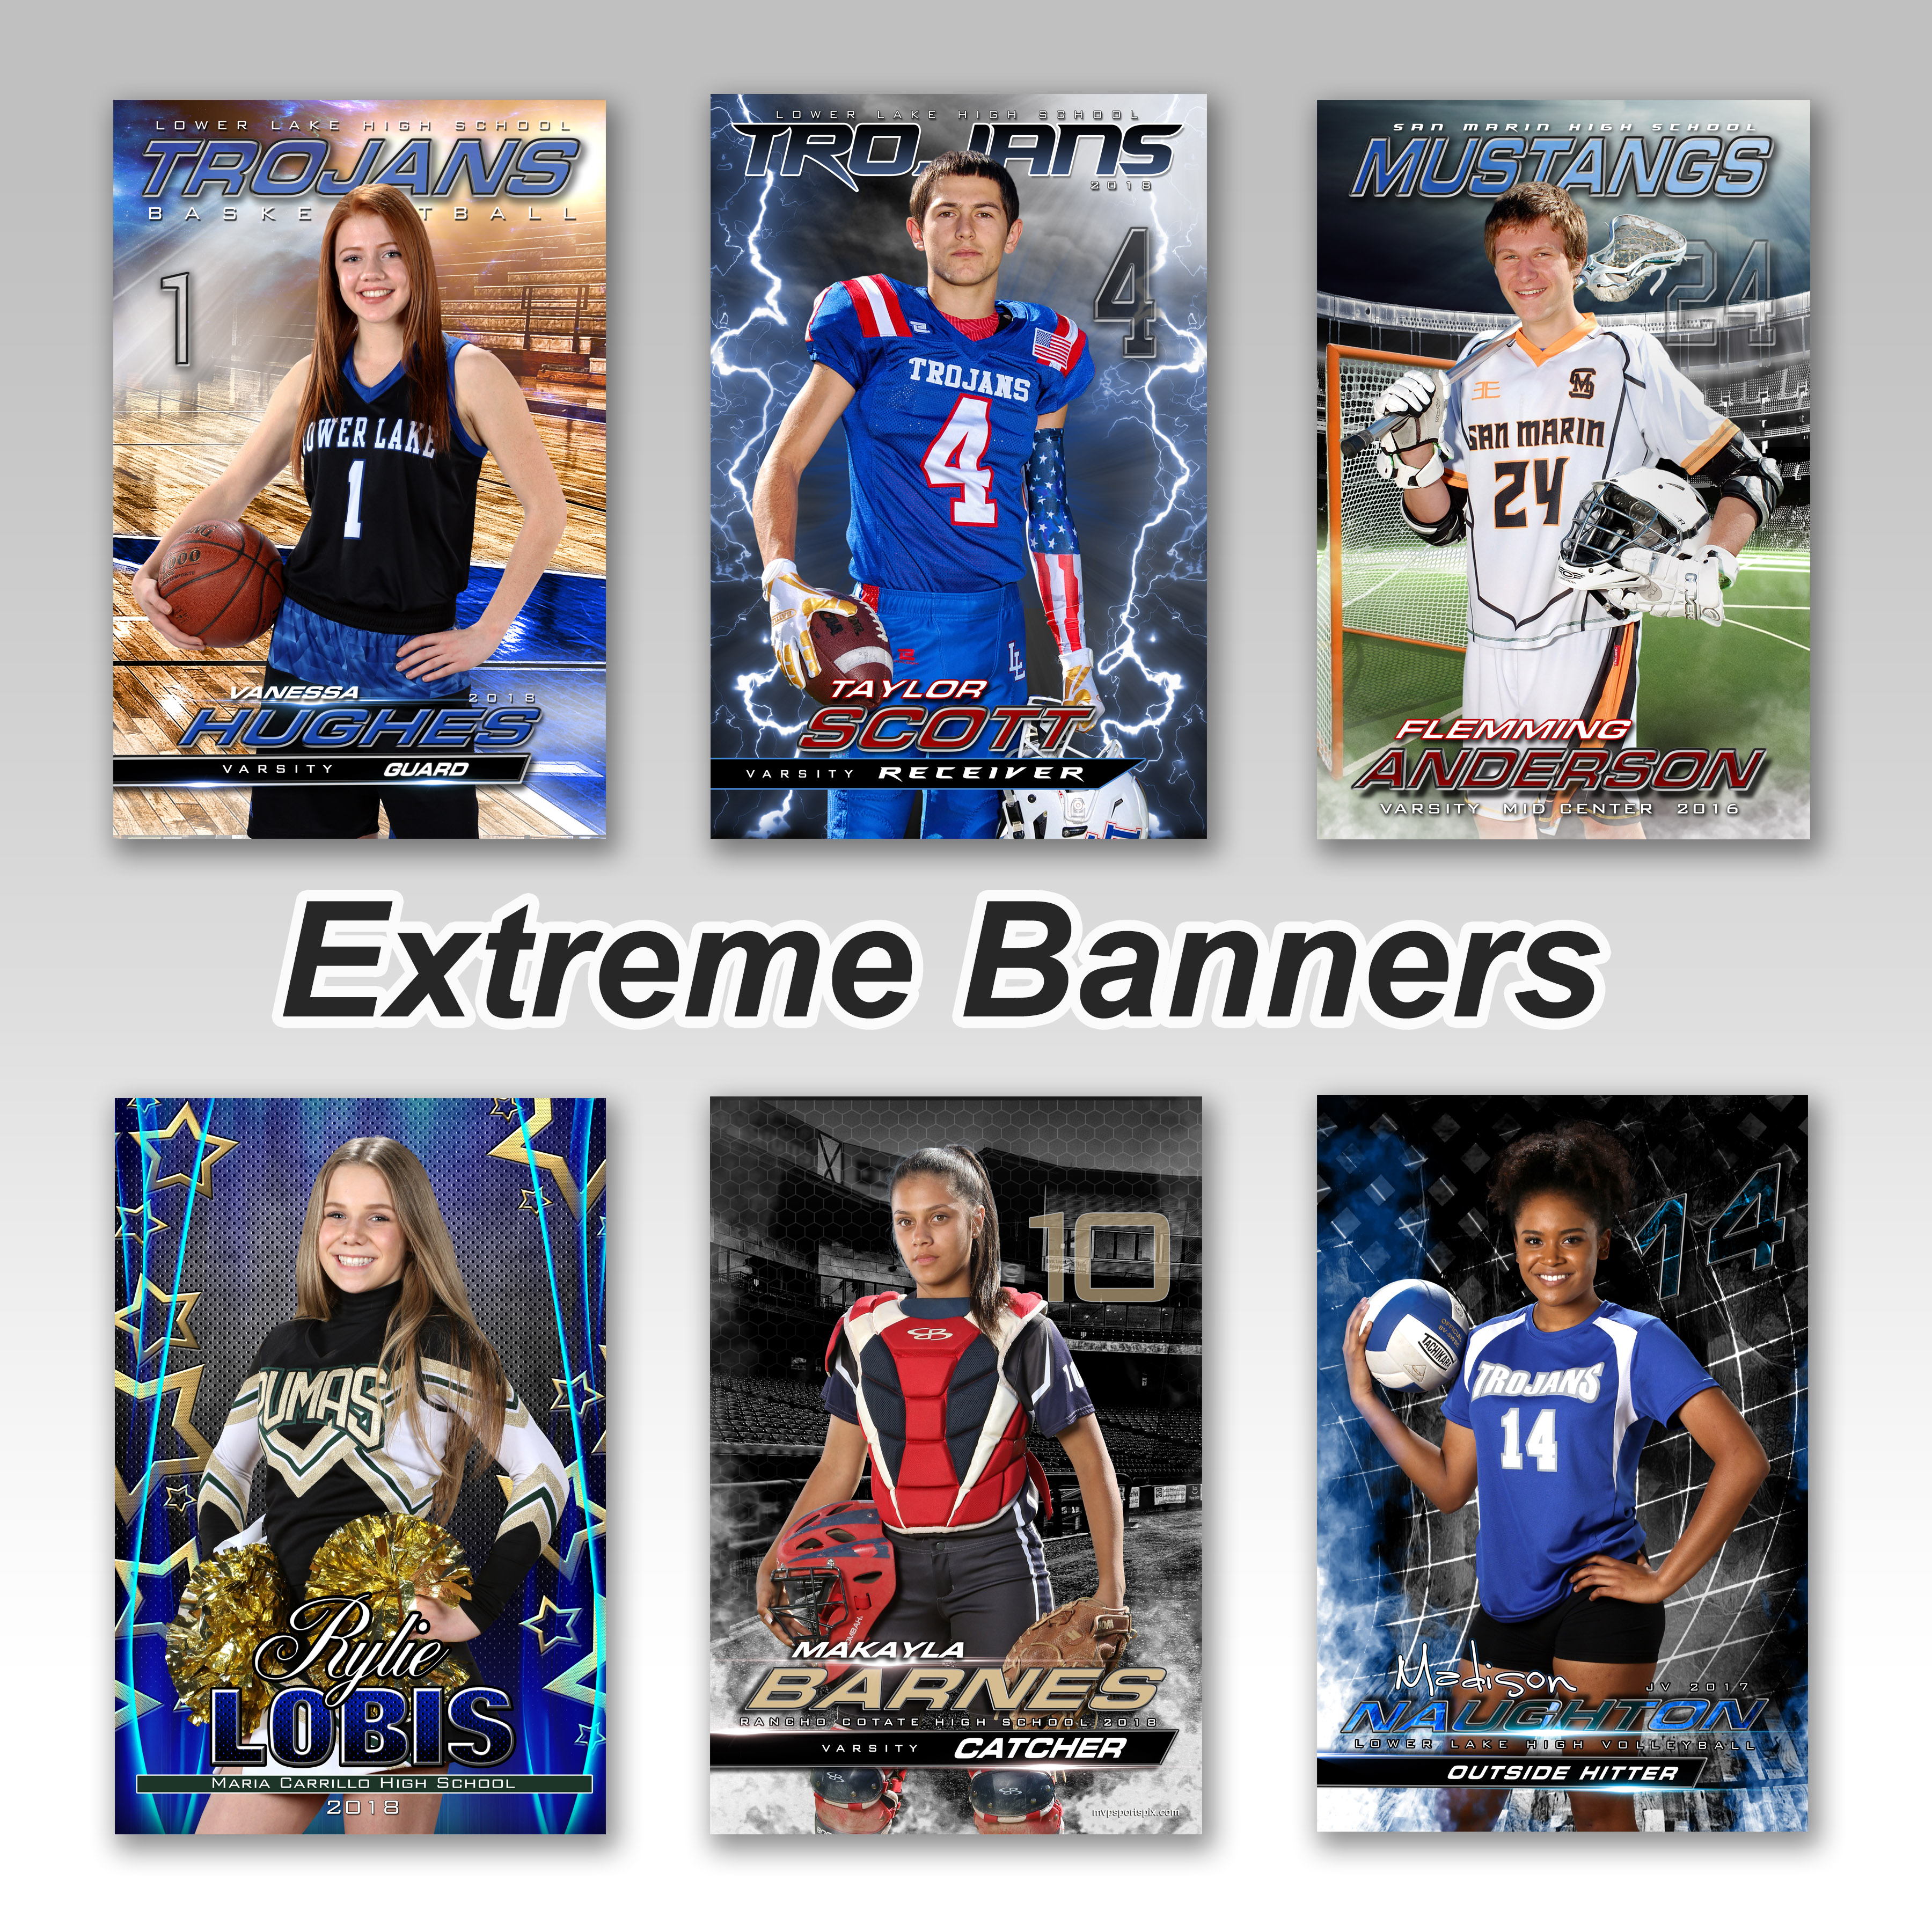 Extreme Banners